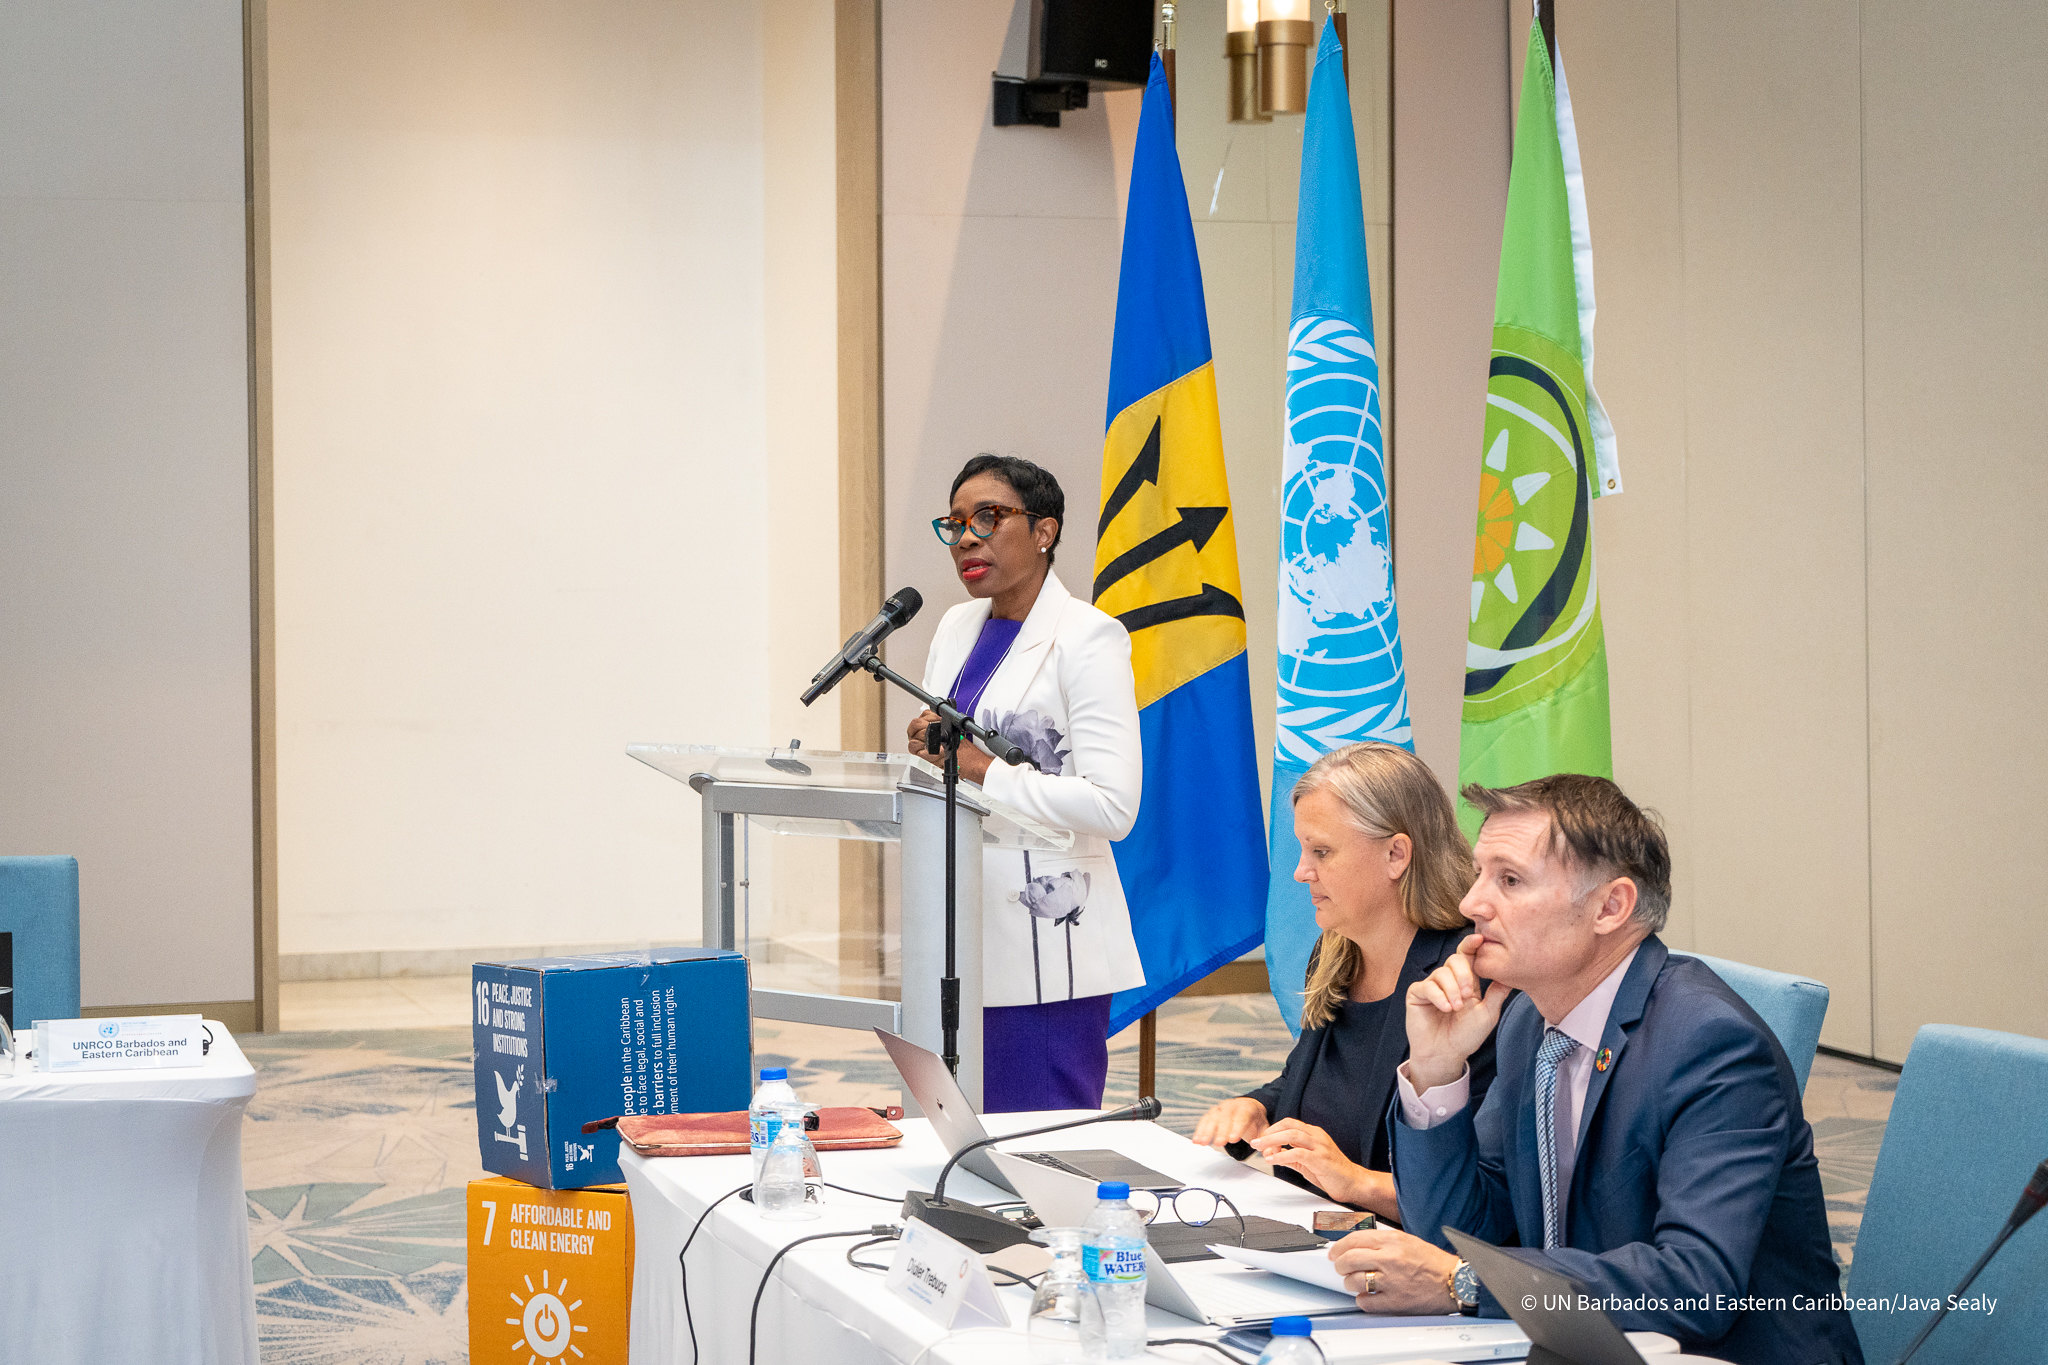 Senator Dr. the Hon. Shantal Munro-Knight, Minister in the Prime Minister’s Office of Barbados overseeing the SDGs